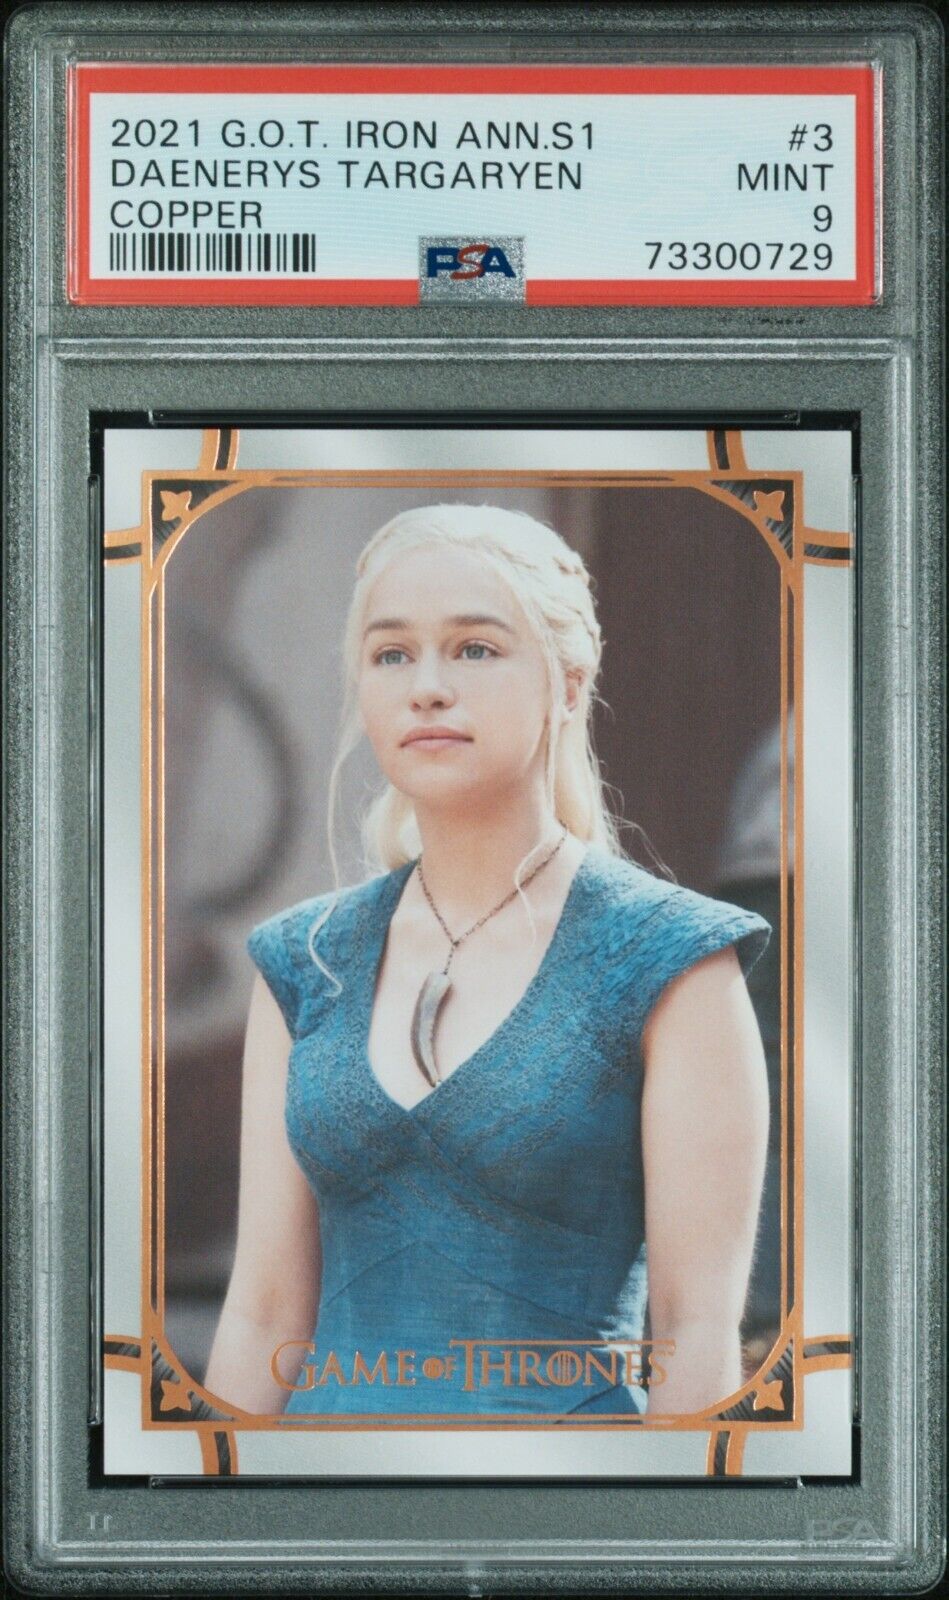 2021 Game of Thrones Daenerys Copper SP /199 #3 PSA 9 Mint Pop 2 - None higher